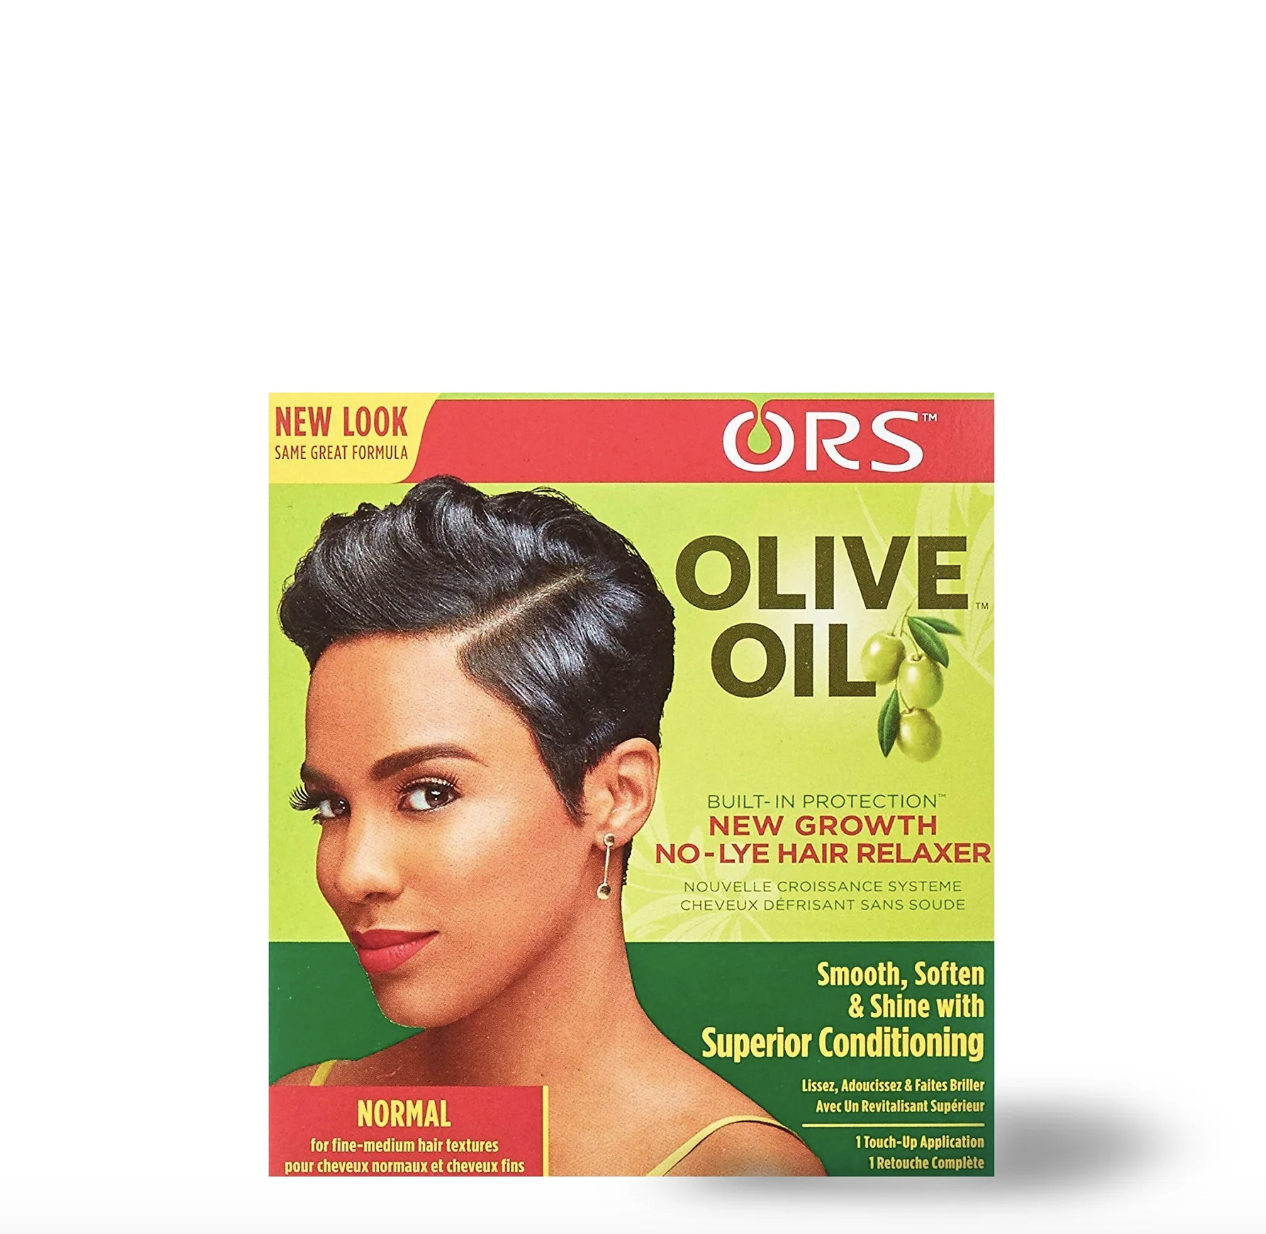 ORS Olive Oil New Growth Relaxer kit